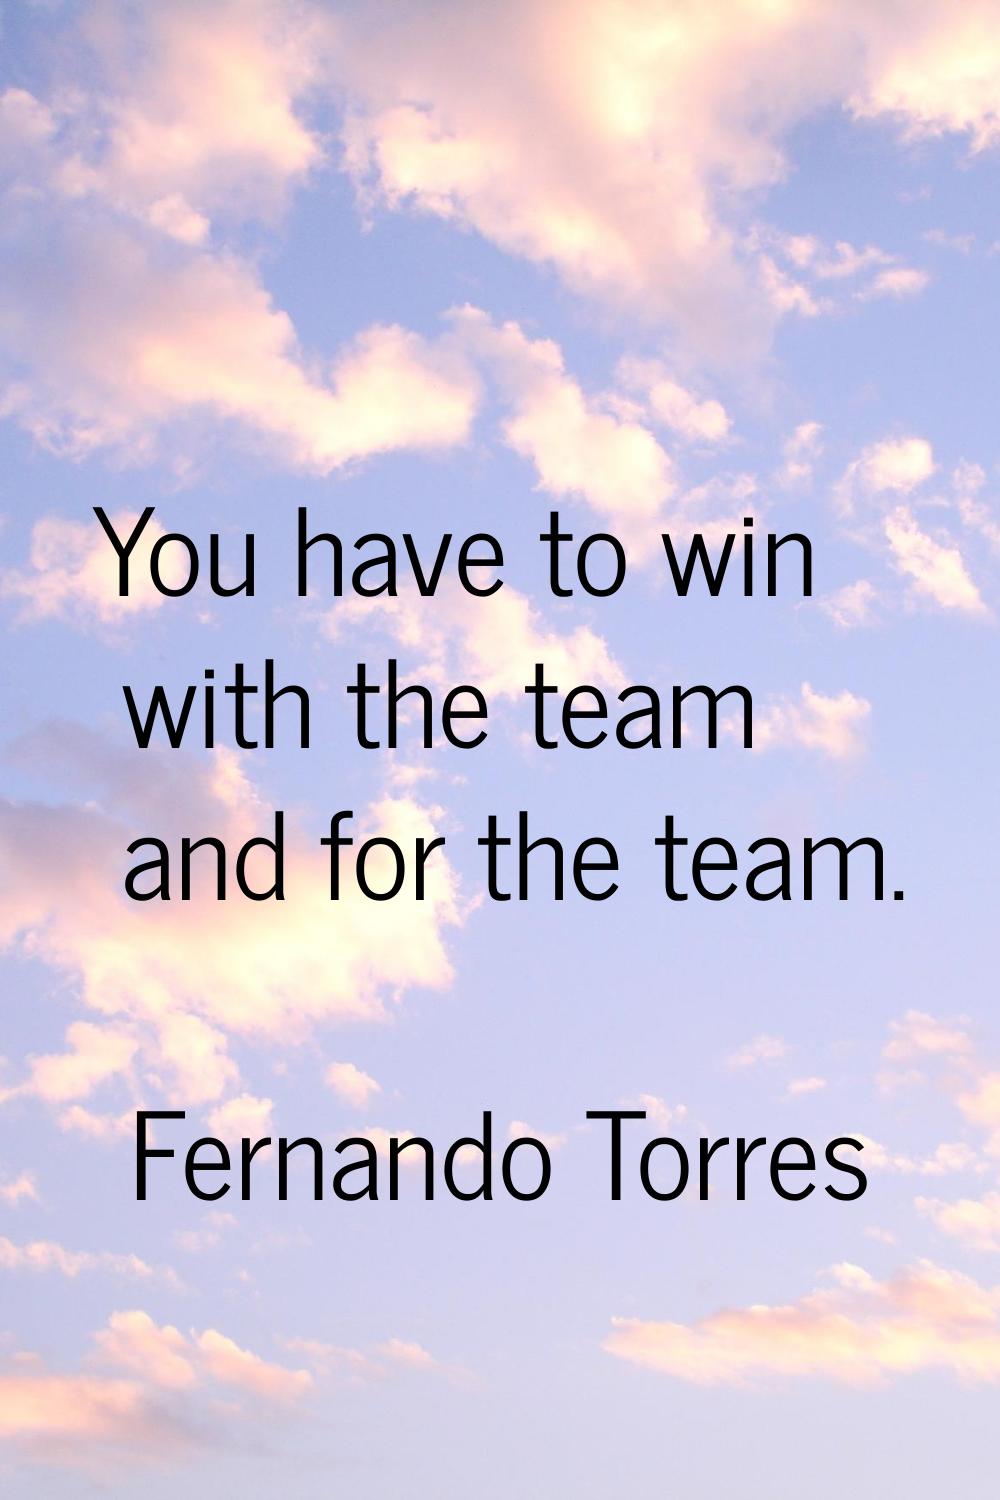 You have to win with the team and for the team.